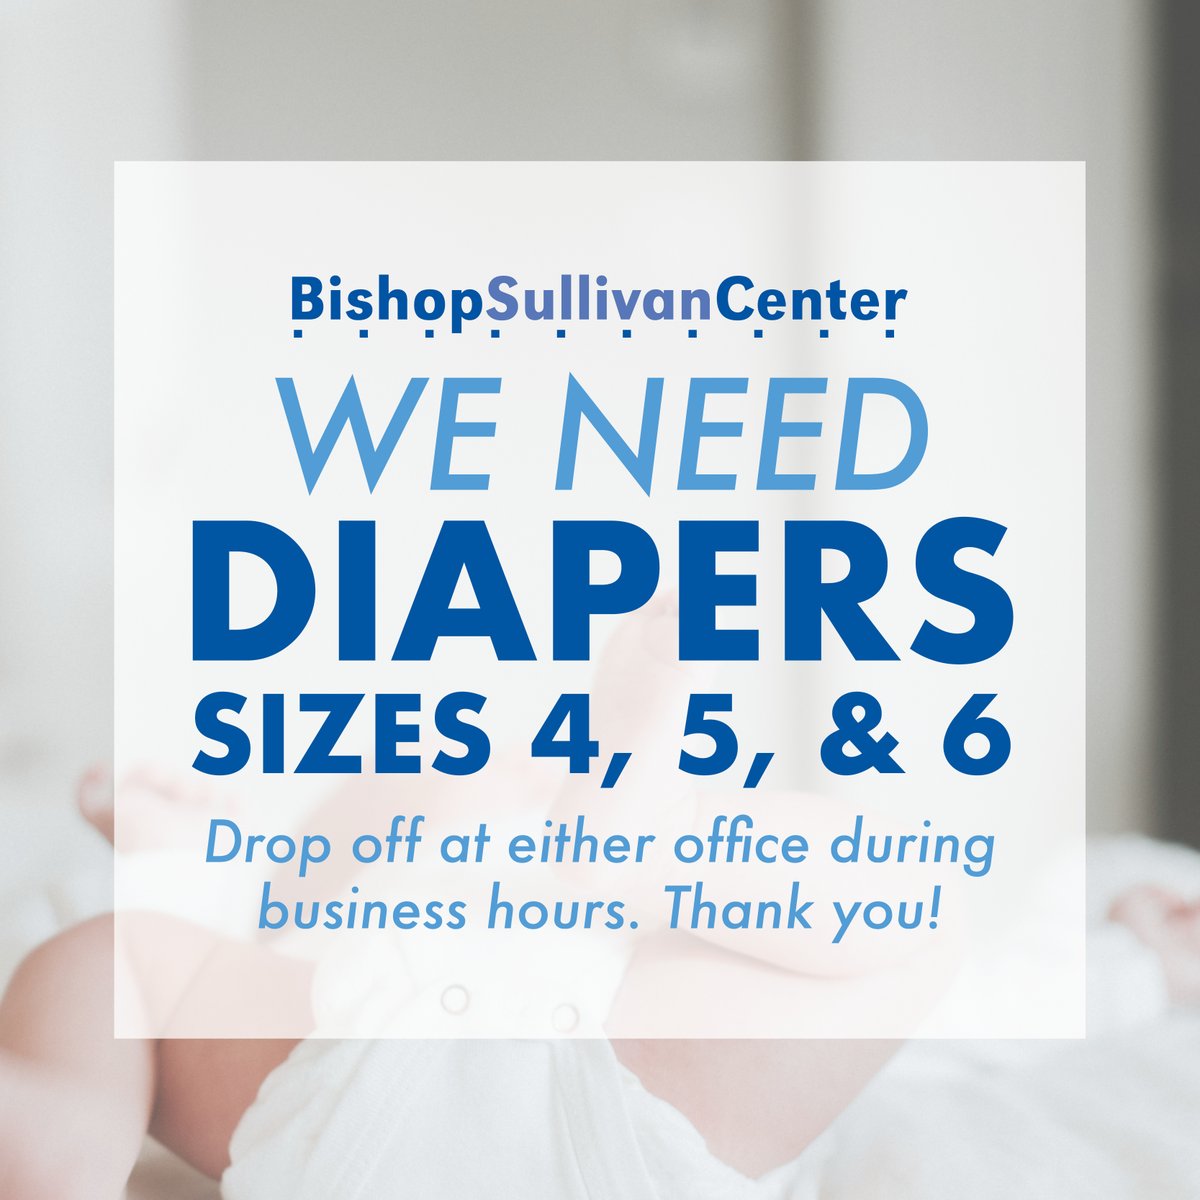 Diapers are a basic need, but for struggling families, keeping infants clean, dry, and healthy can be a struggle. Help us stock our pantries' diapers shelves! We're running low on sizes 4, 5, and 6. You can donate diapers at either BSC office during business hours. Thank you!